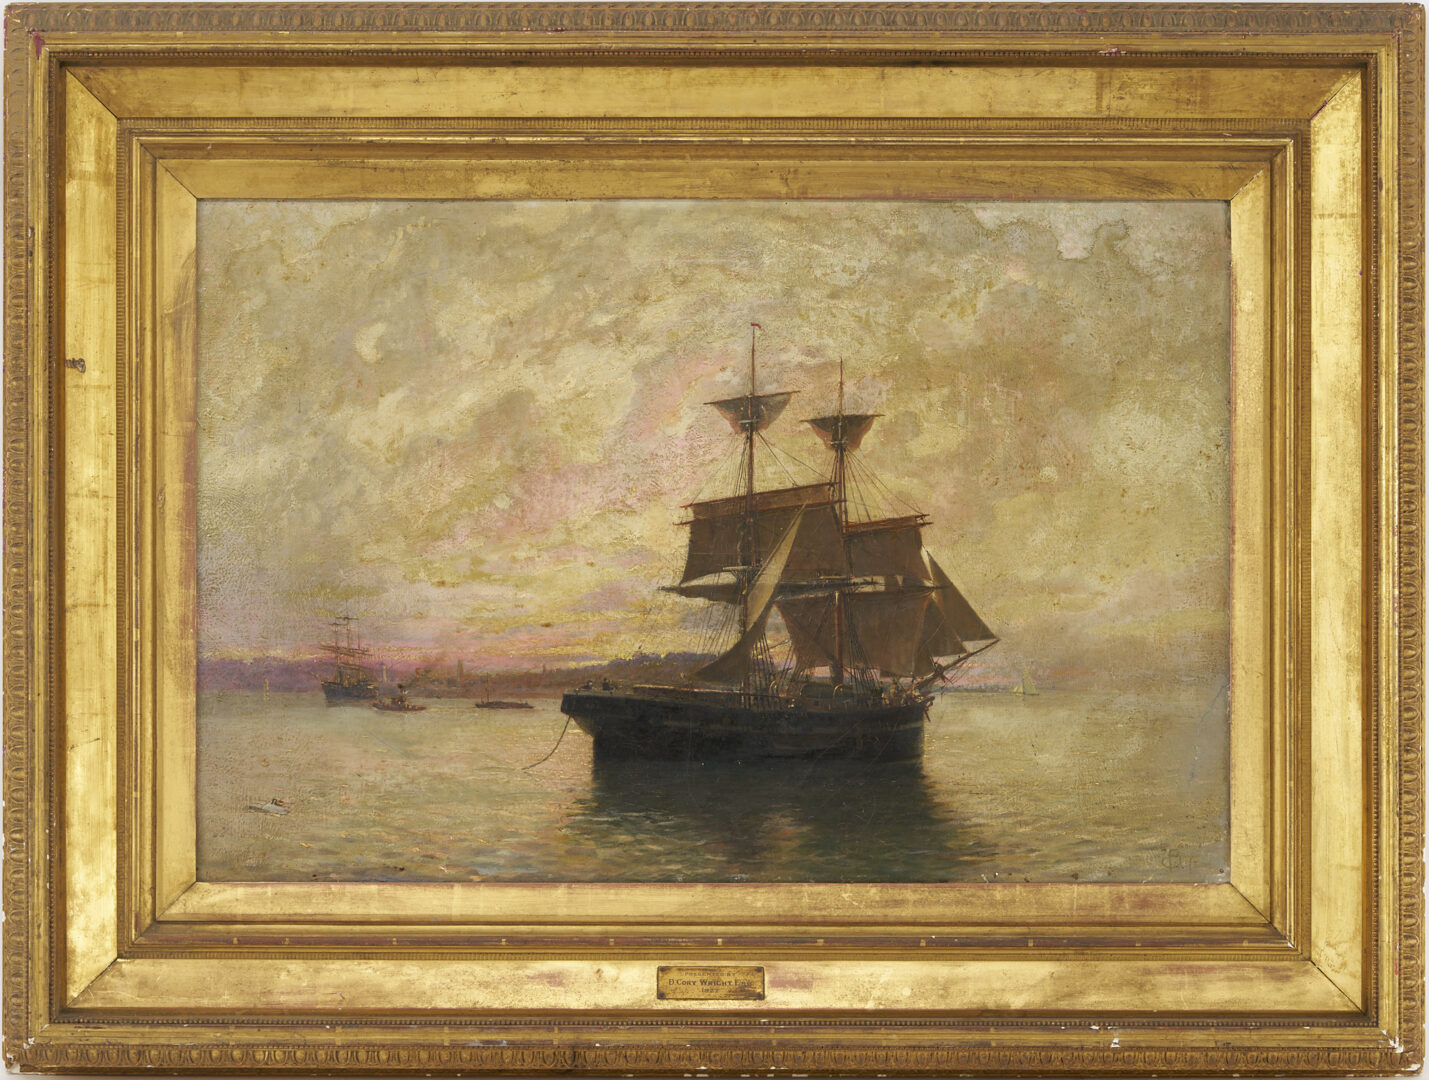 Lot 309: English School 19th c. Sunset Seascape Painting, Signed